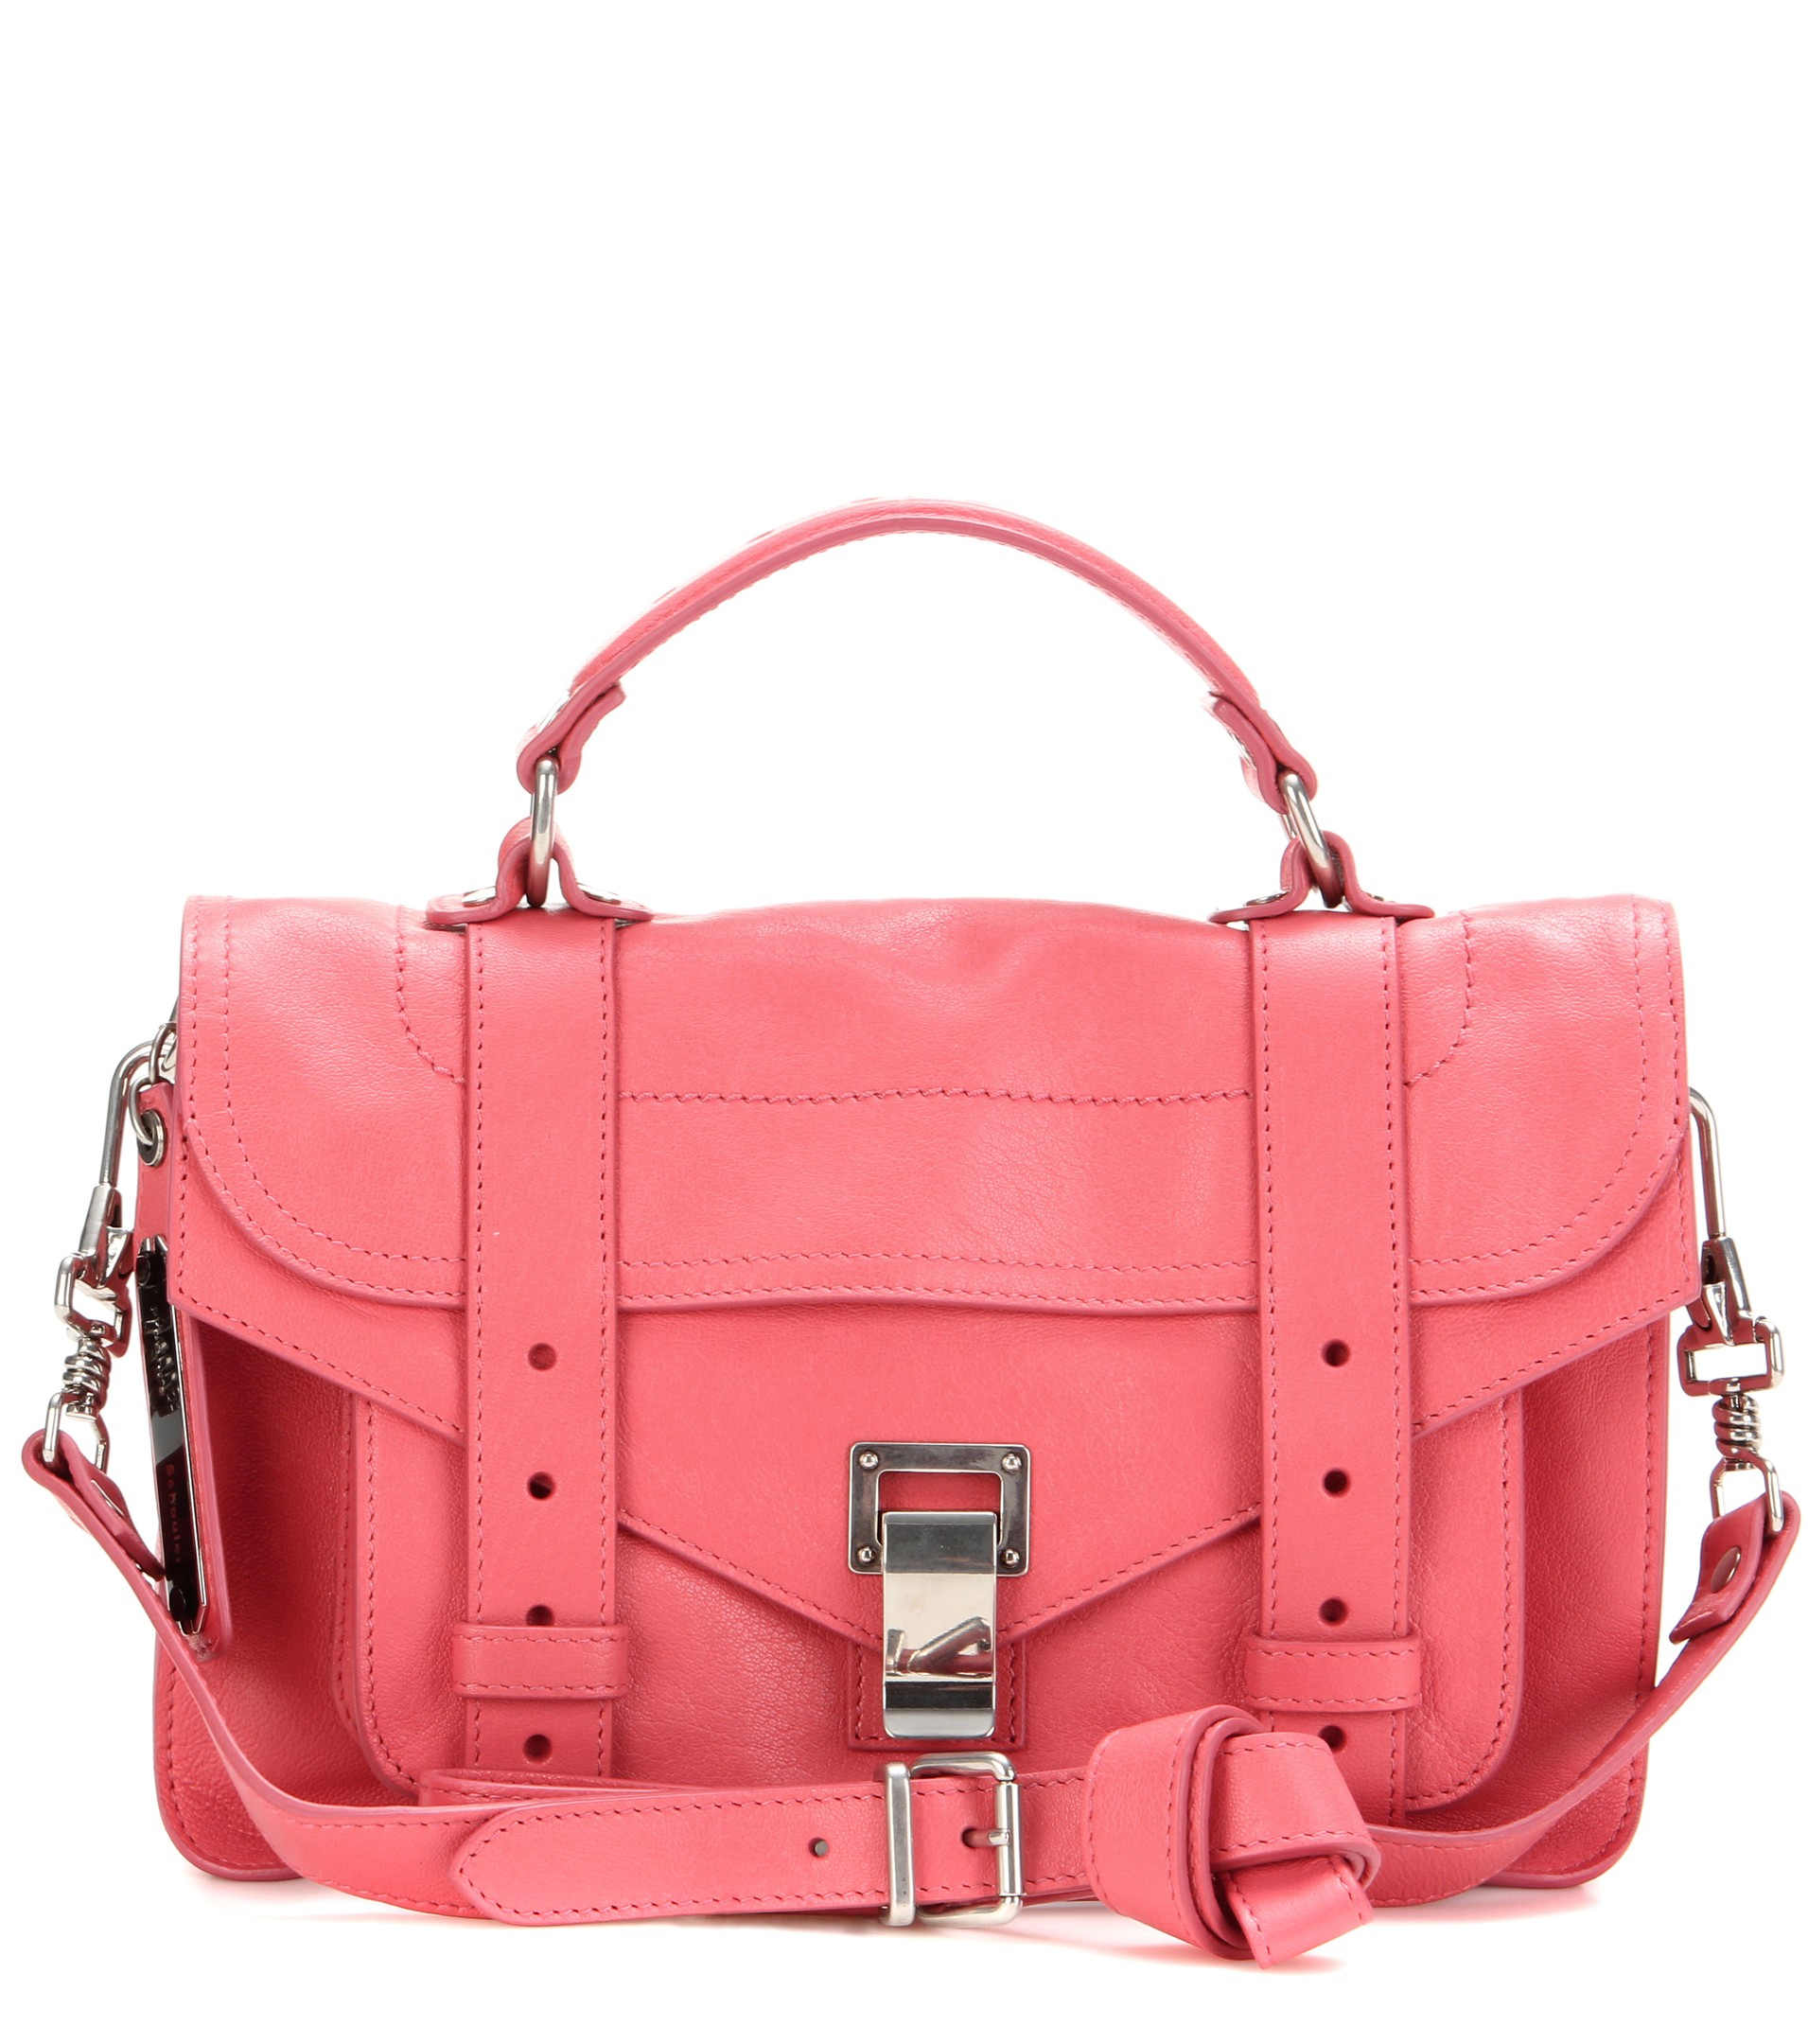 Proenza Schouler Ps1 Tiny Leather Shoulder Bag in Pink - Lyst